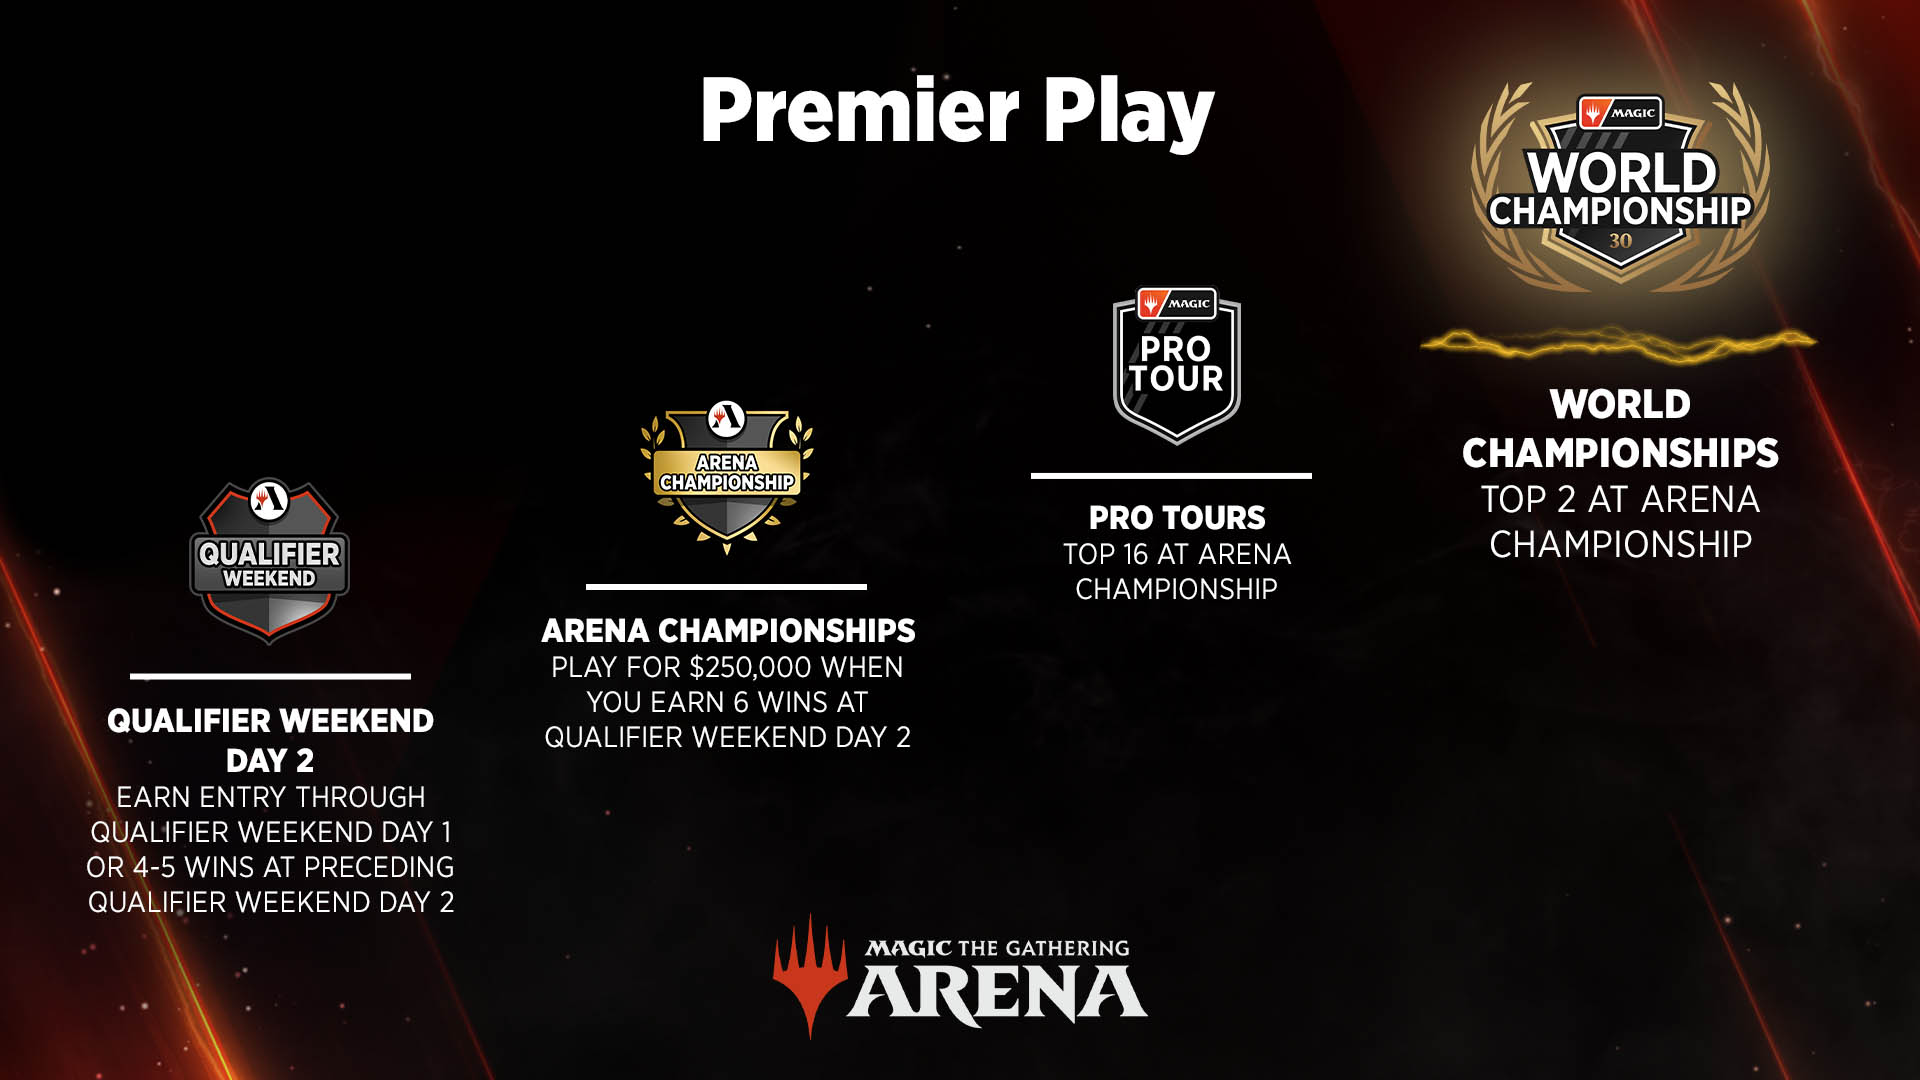 Premier Play path from Qualifier Weekend Day 2 to Arena Championships, to Pro Tours, to the top: Magic World Championship